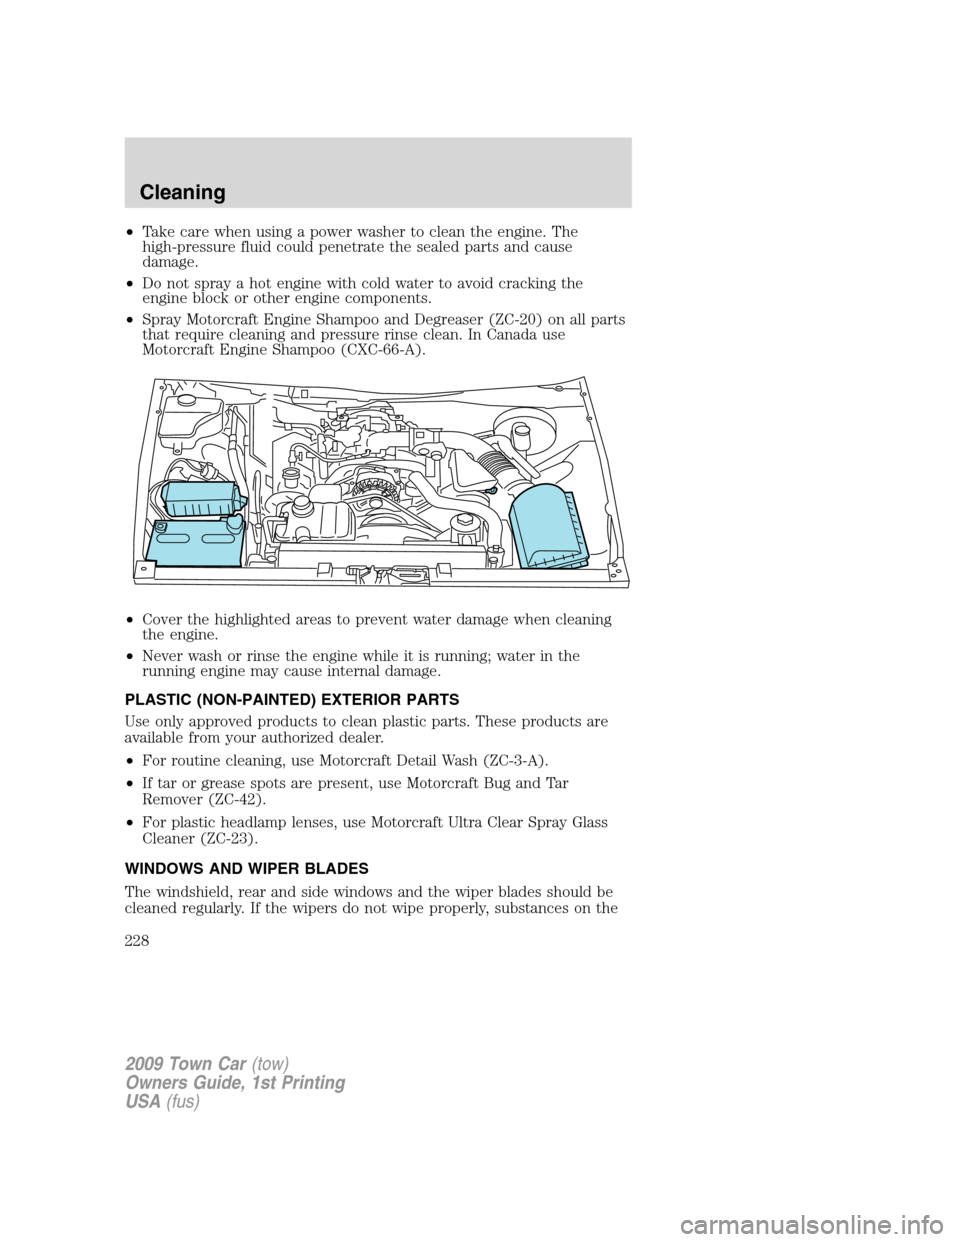 LINCOLN TOWN CAR 2009 Service Manual •Take care when using a power washer to clean the engine. The
high-pressure fluid could penetrate the sealed parts and cause
damage.
•Do not spray a hot engine with cold water to avoid cracking th